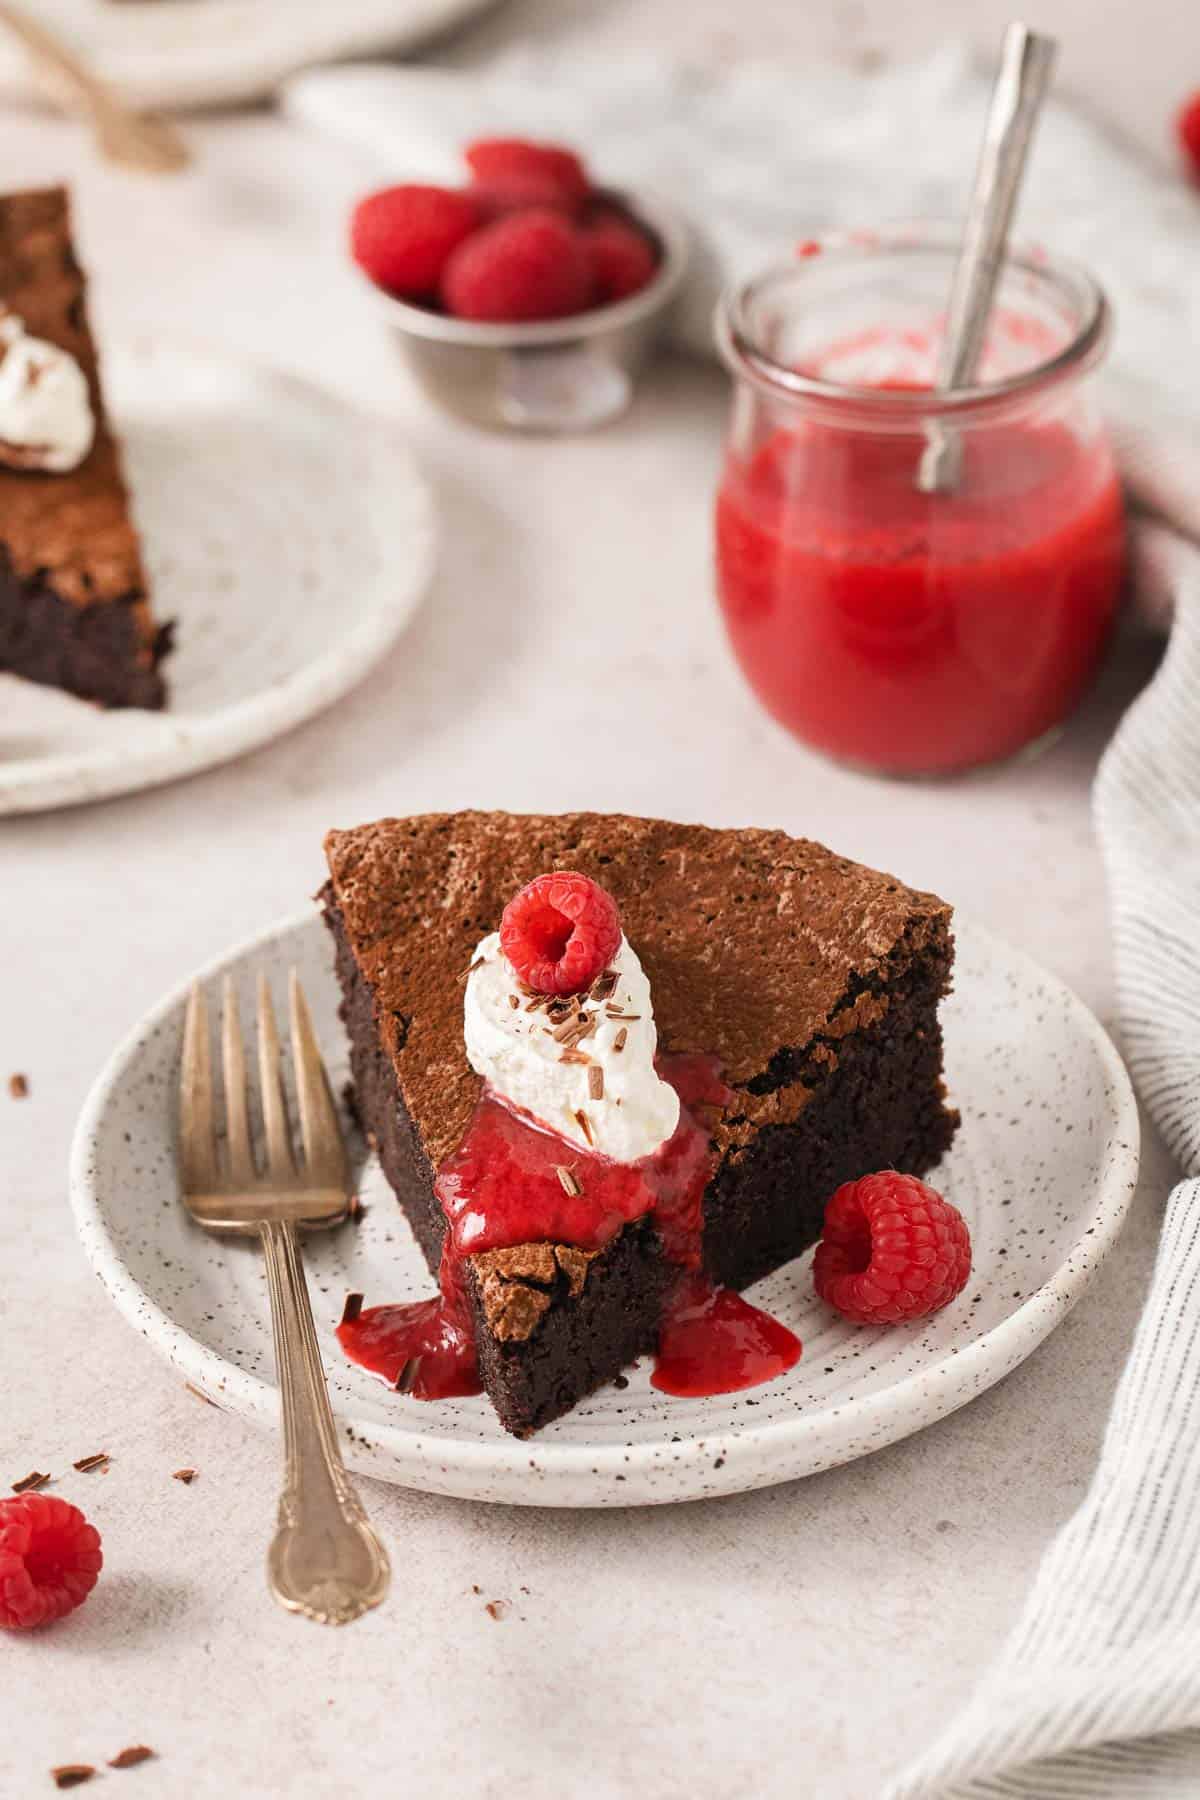 Flourless chocolate torte with raspberry coulis on top